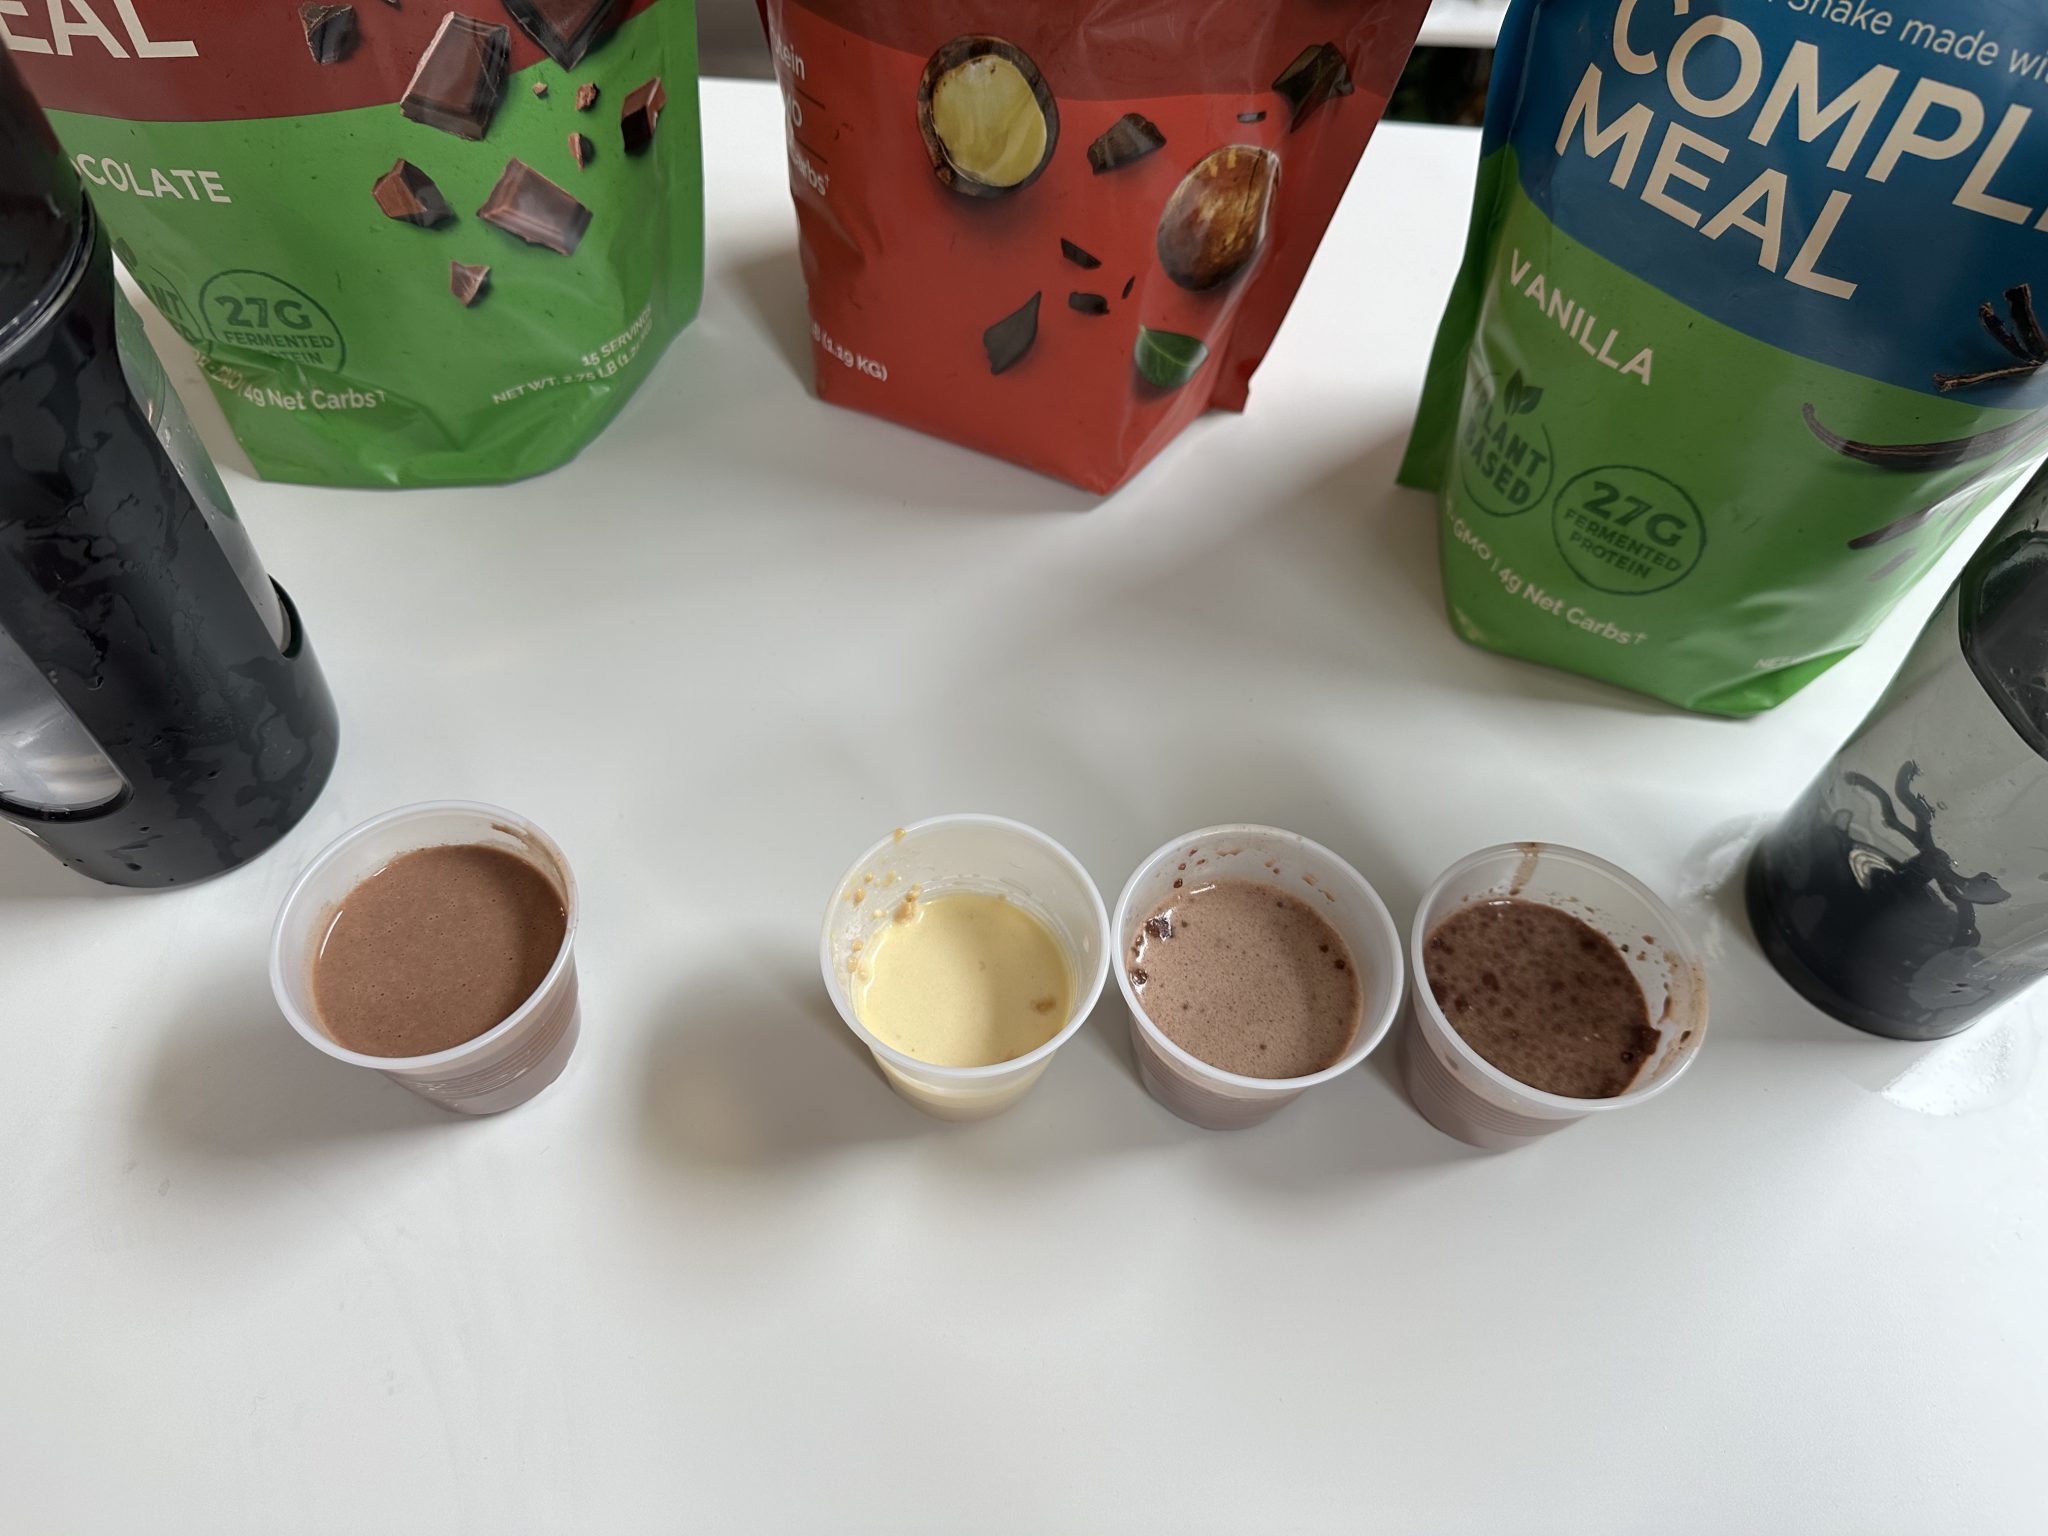 Testing HLTH code meal replacement flavors in shaker cup and blender bottle.